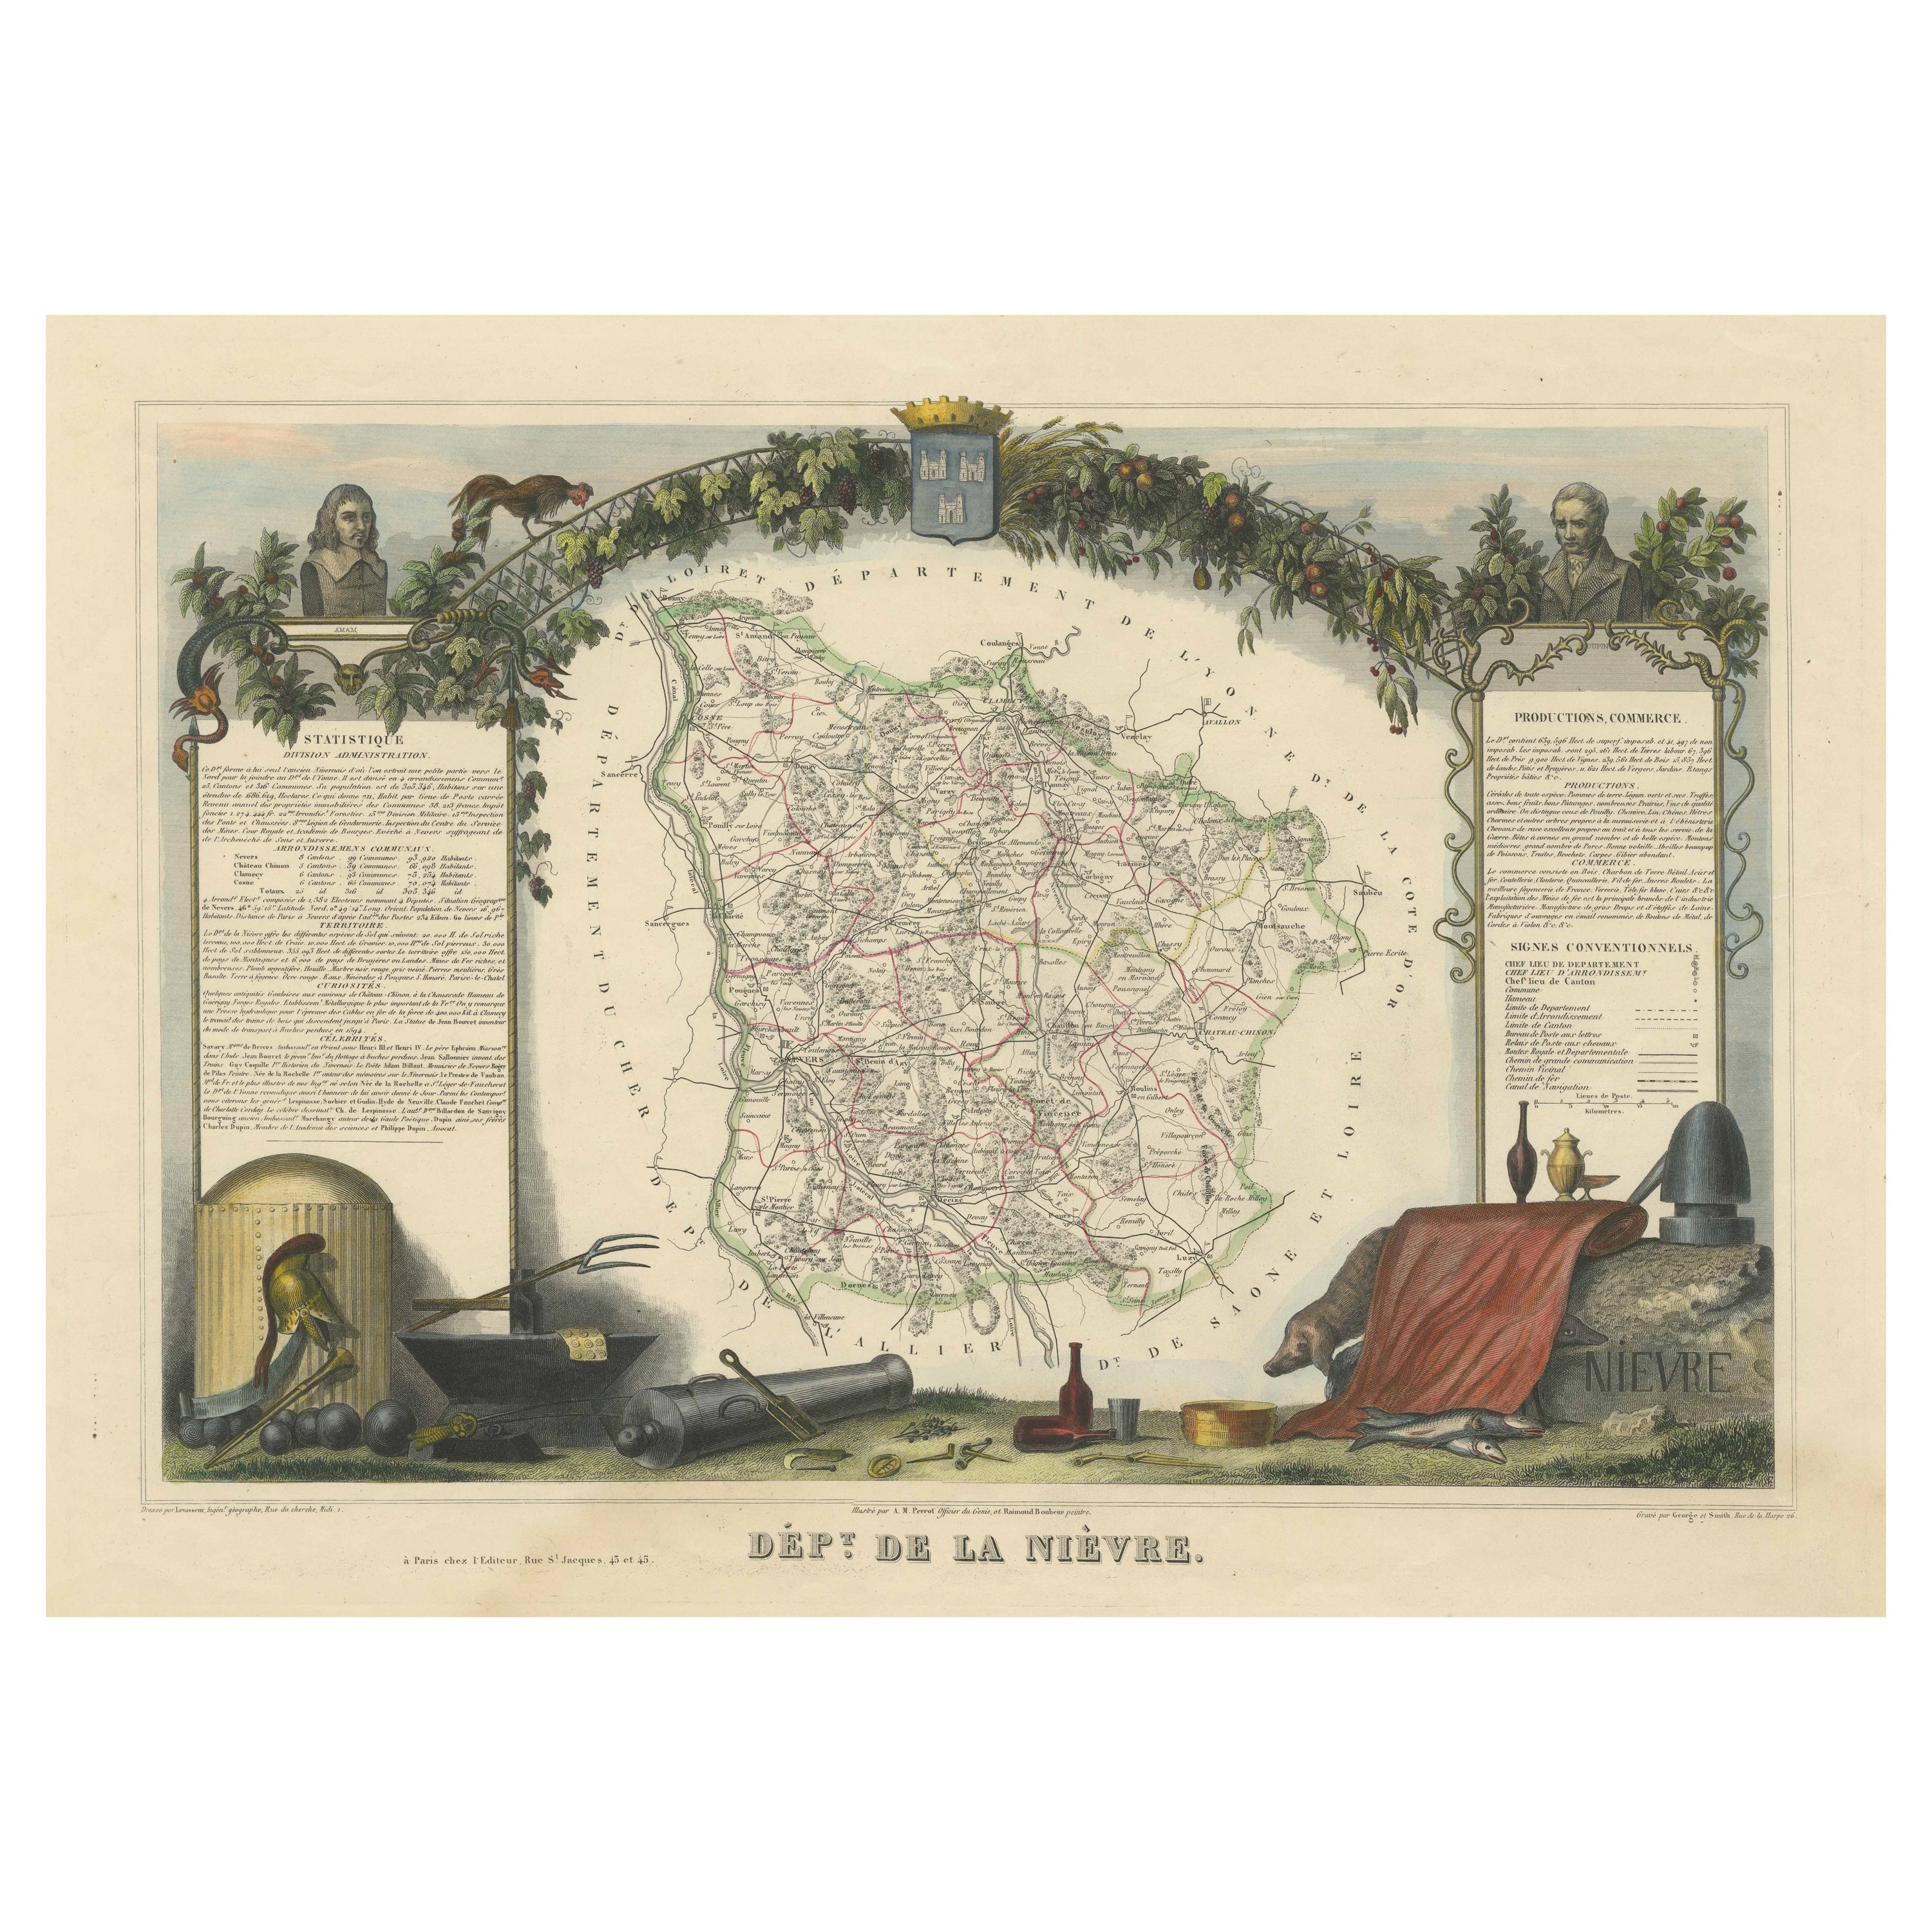 Old Map of the French Department of Nièvre, France For Sale